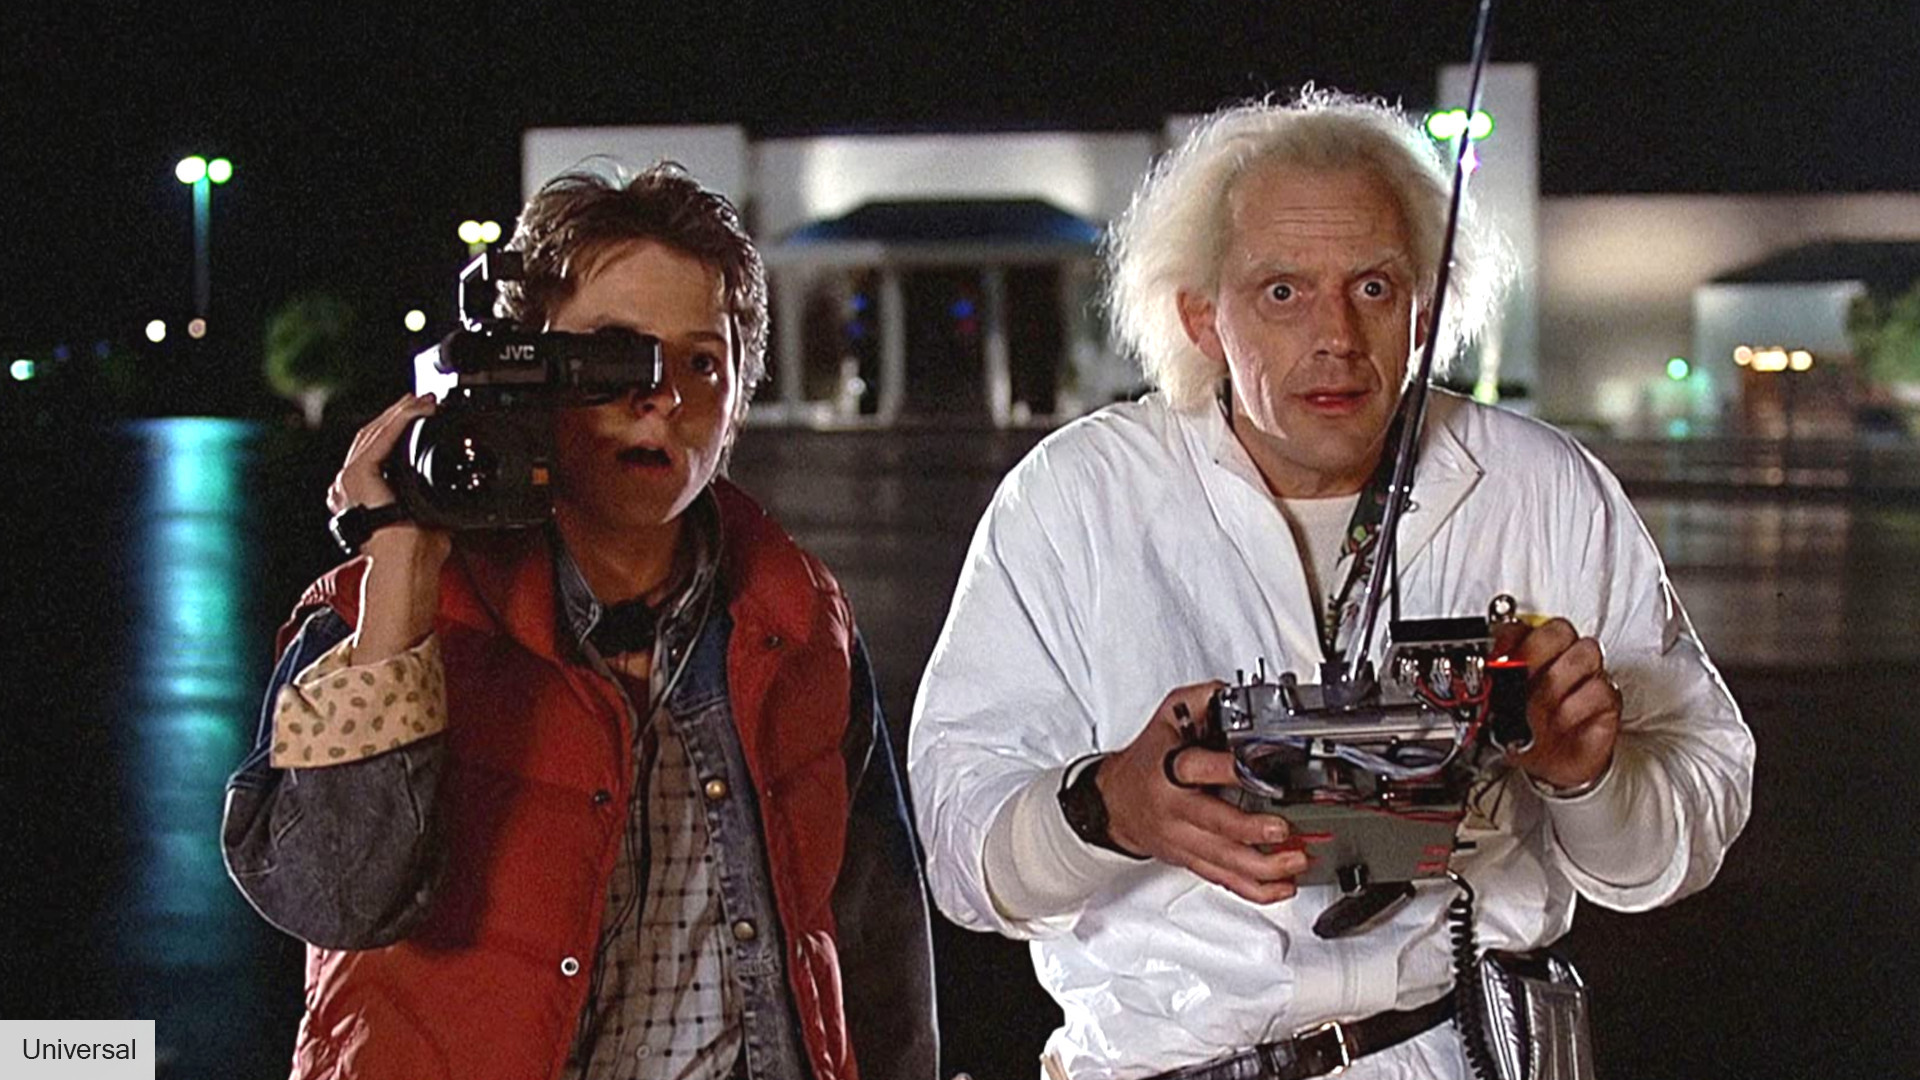 time travel movies like back to the future